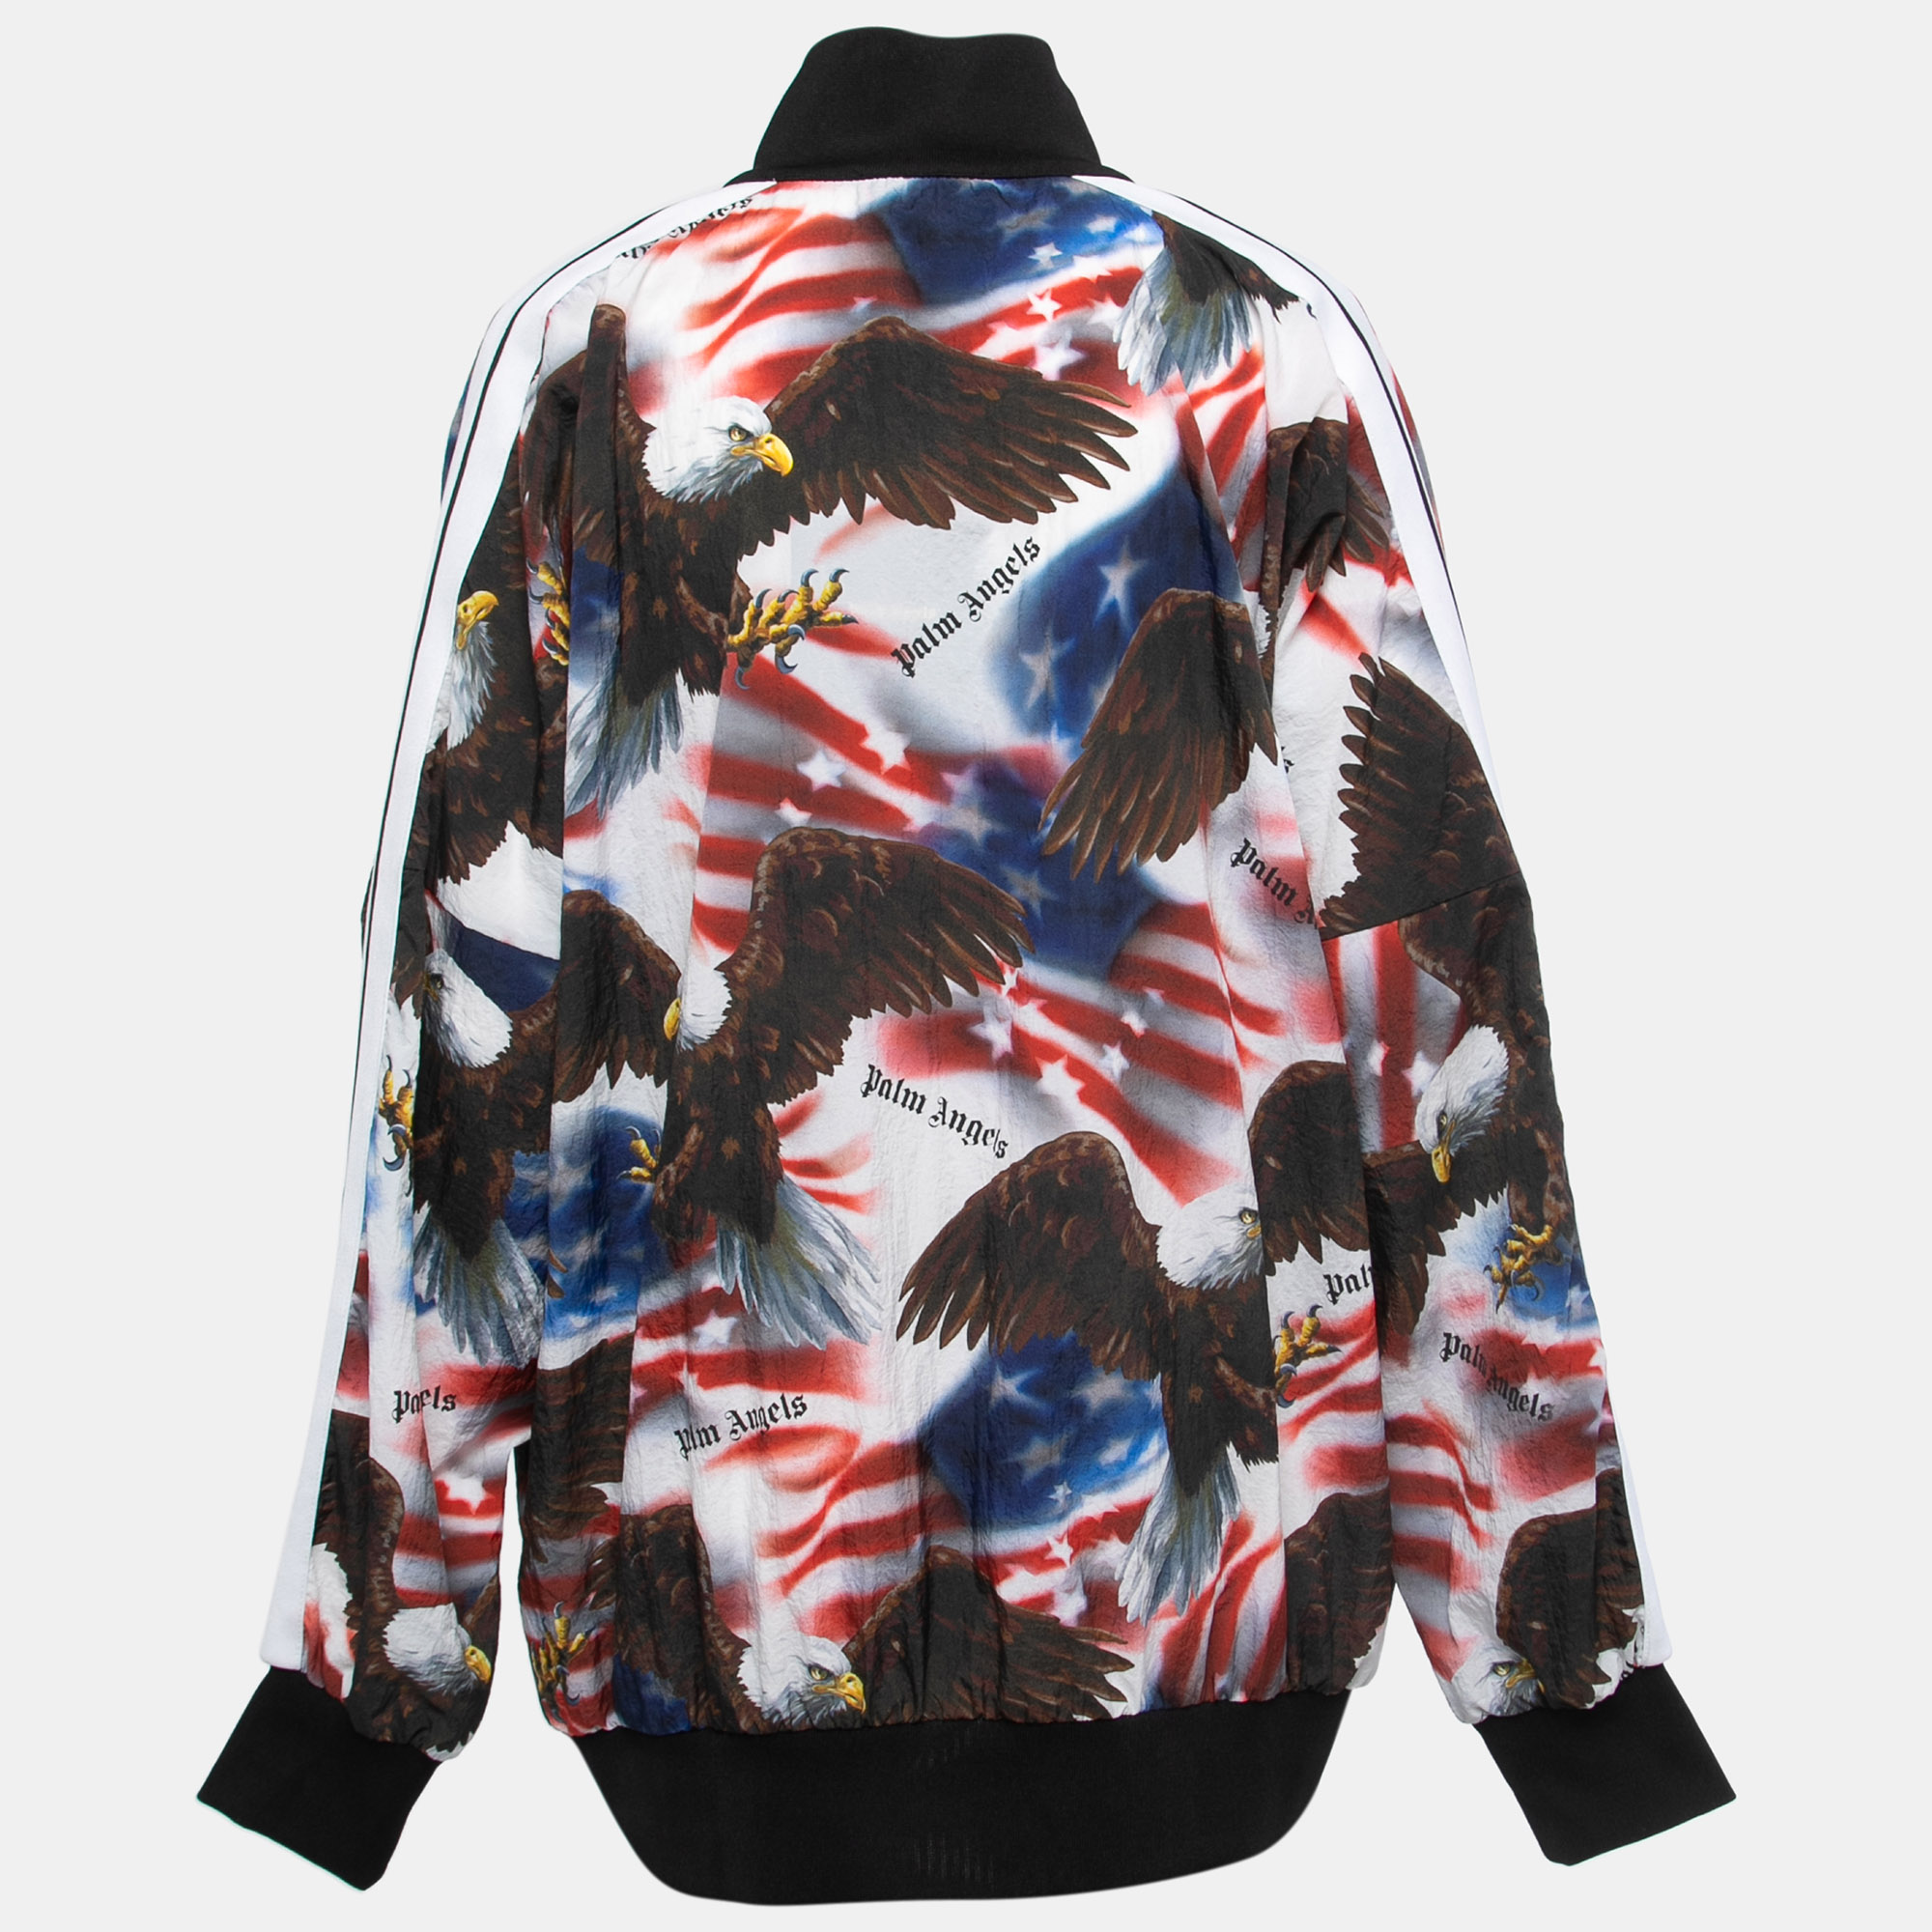 

Palm Angels Multicolor Eagle Printed Nylon Zip Front Jacket